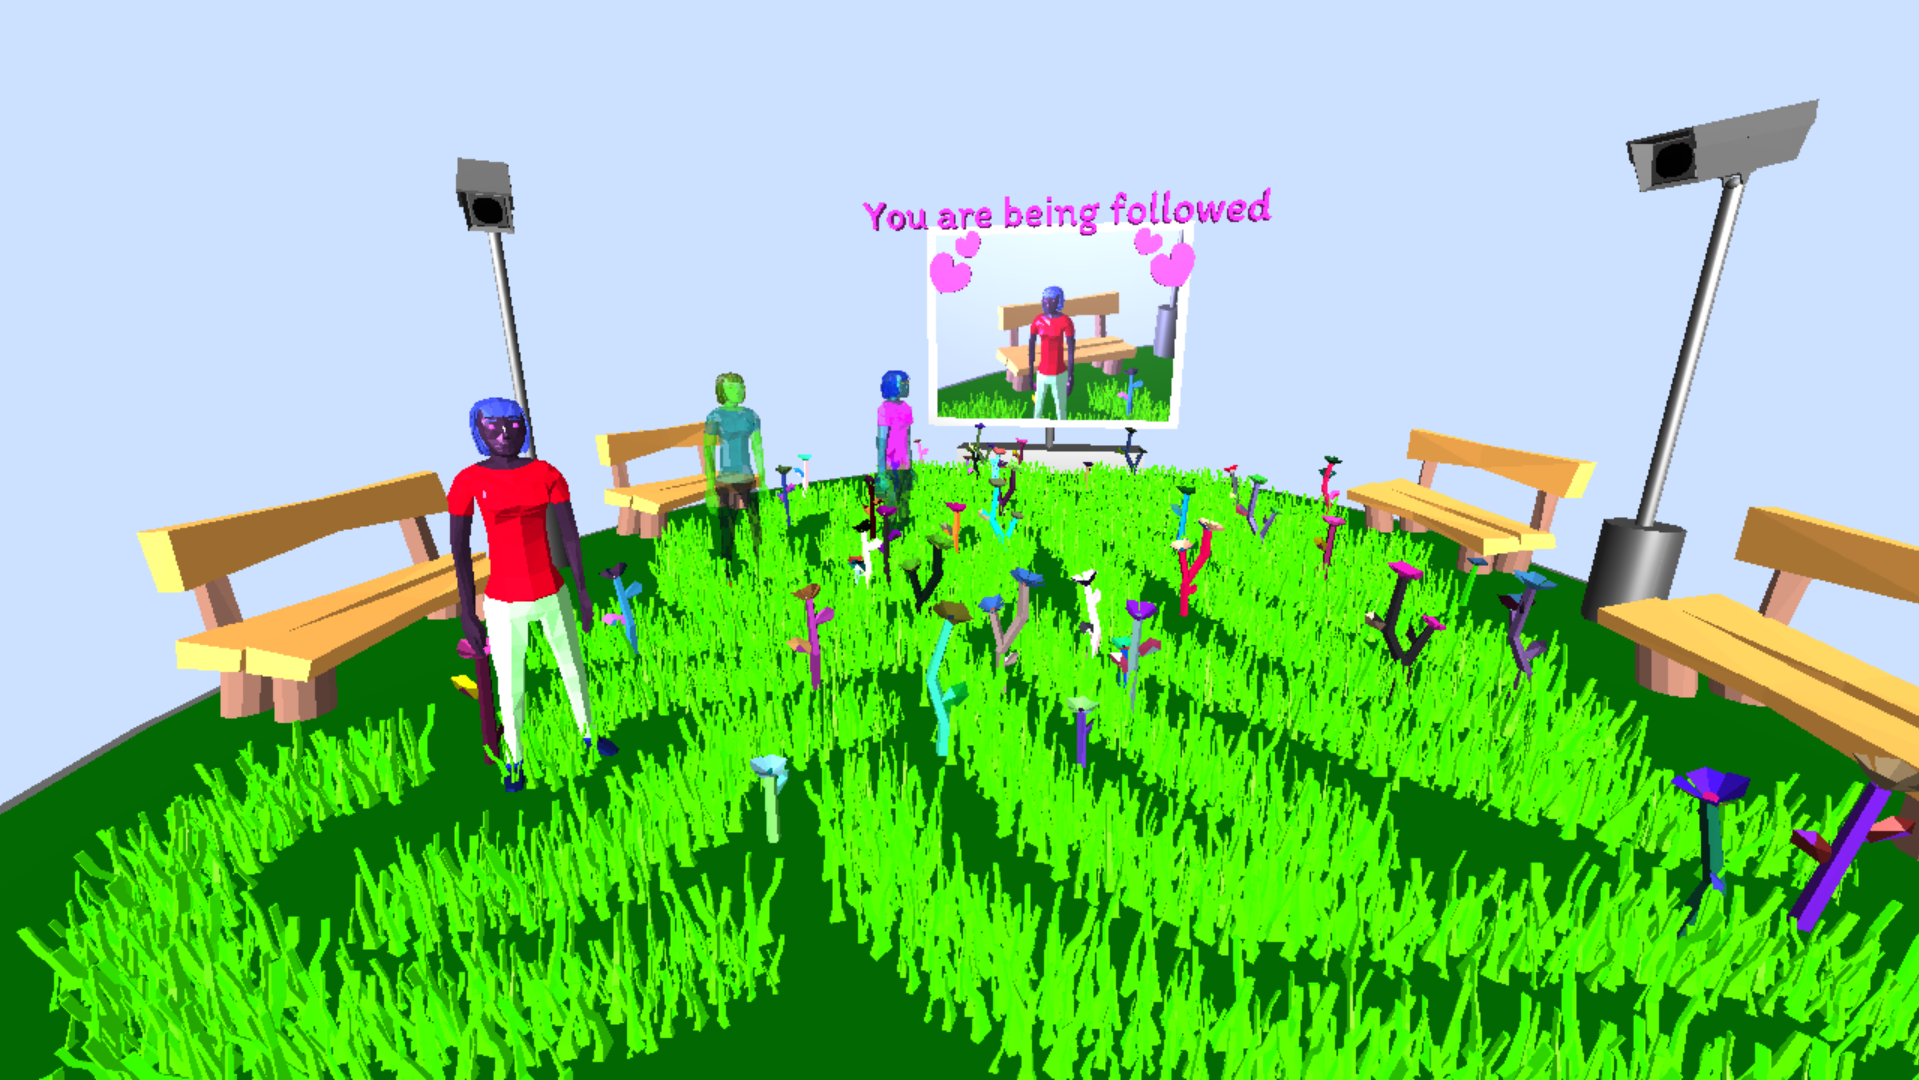 A screenshot of a low-poly garden, there are flowers and people and menacing security cameras.